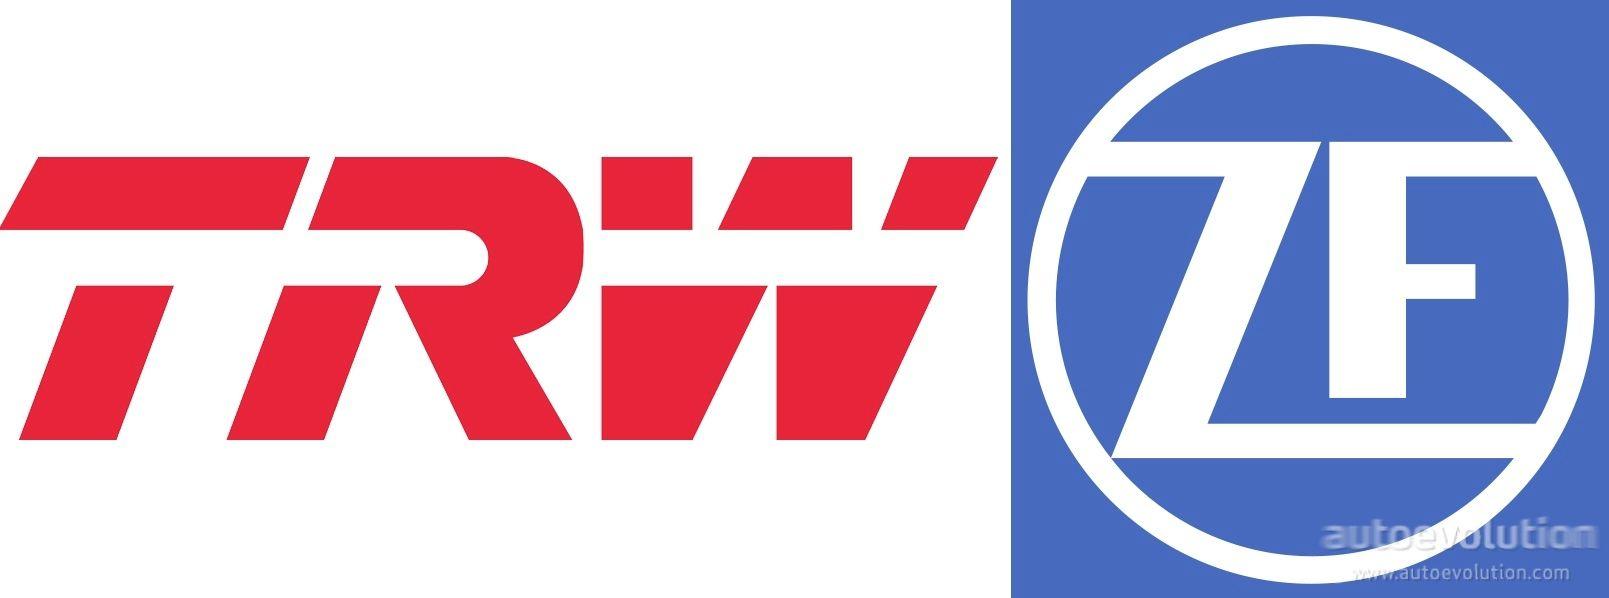 New ZF Logo - TRW ZF: New Commision For Galvo Service